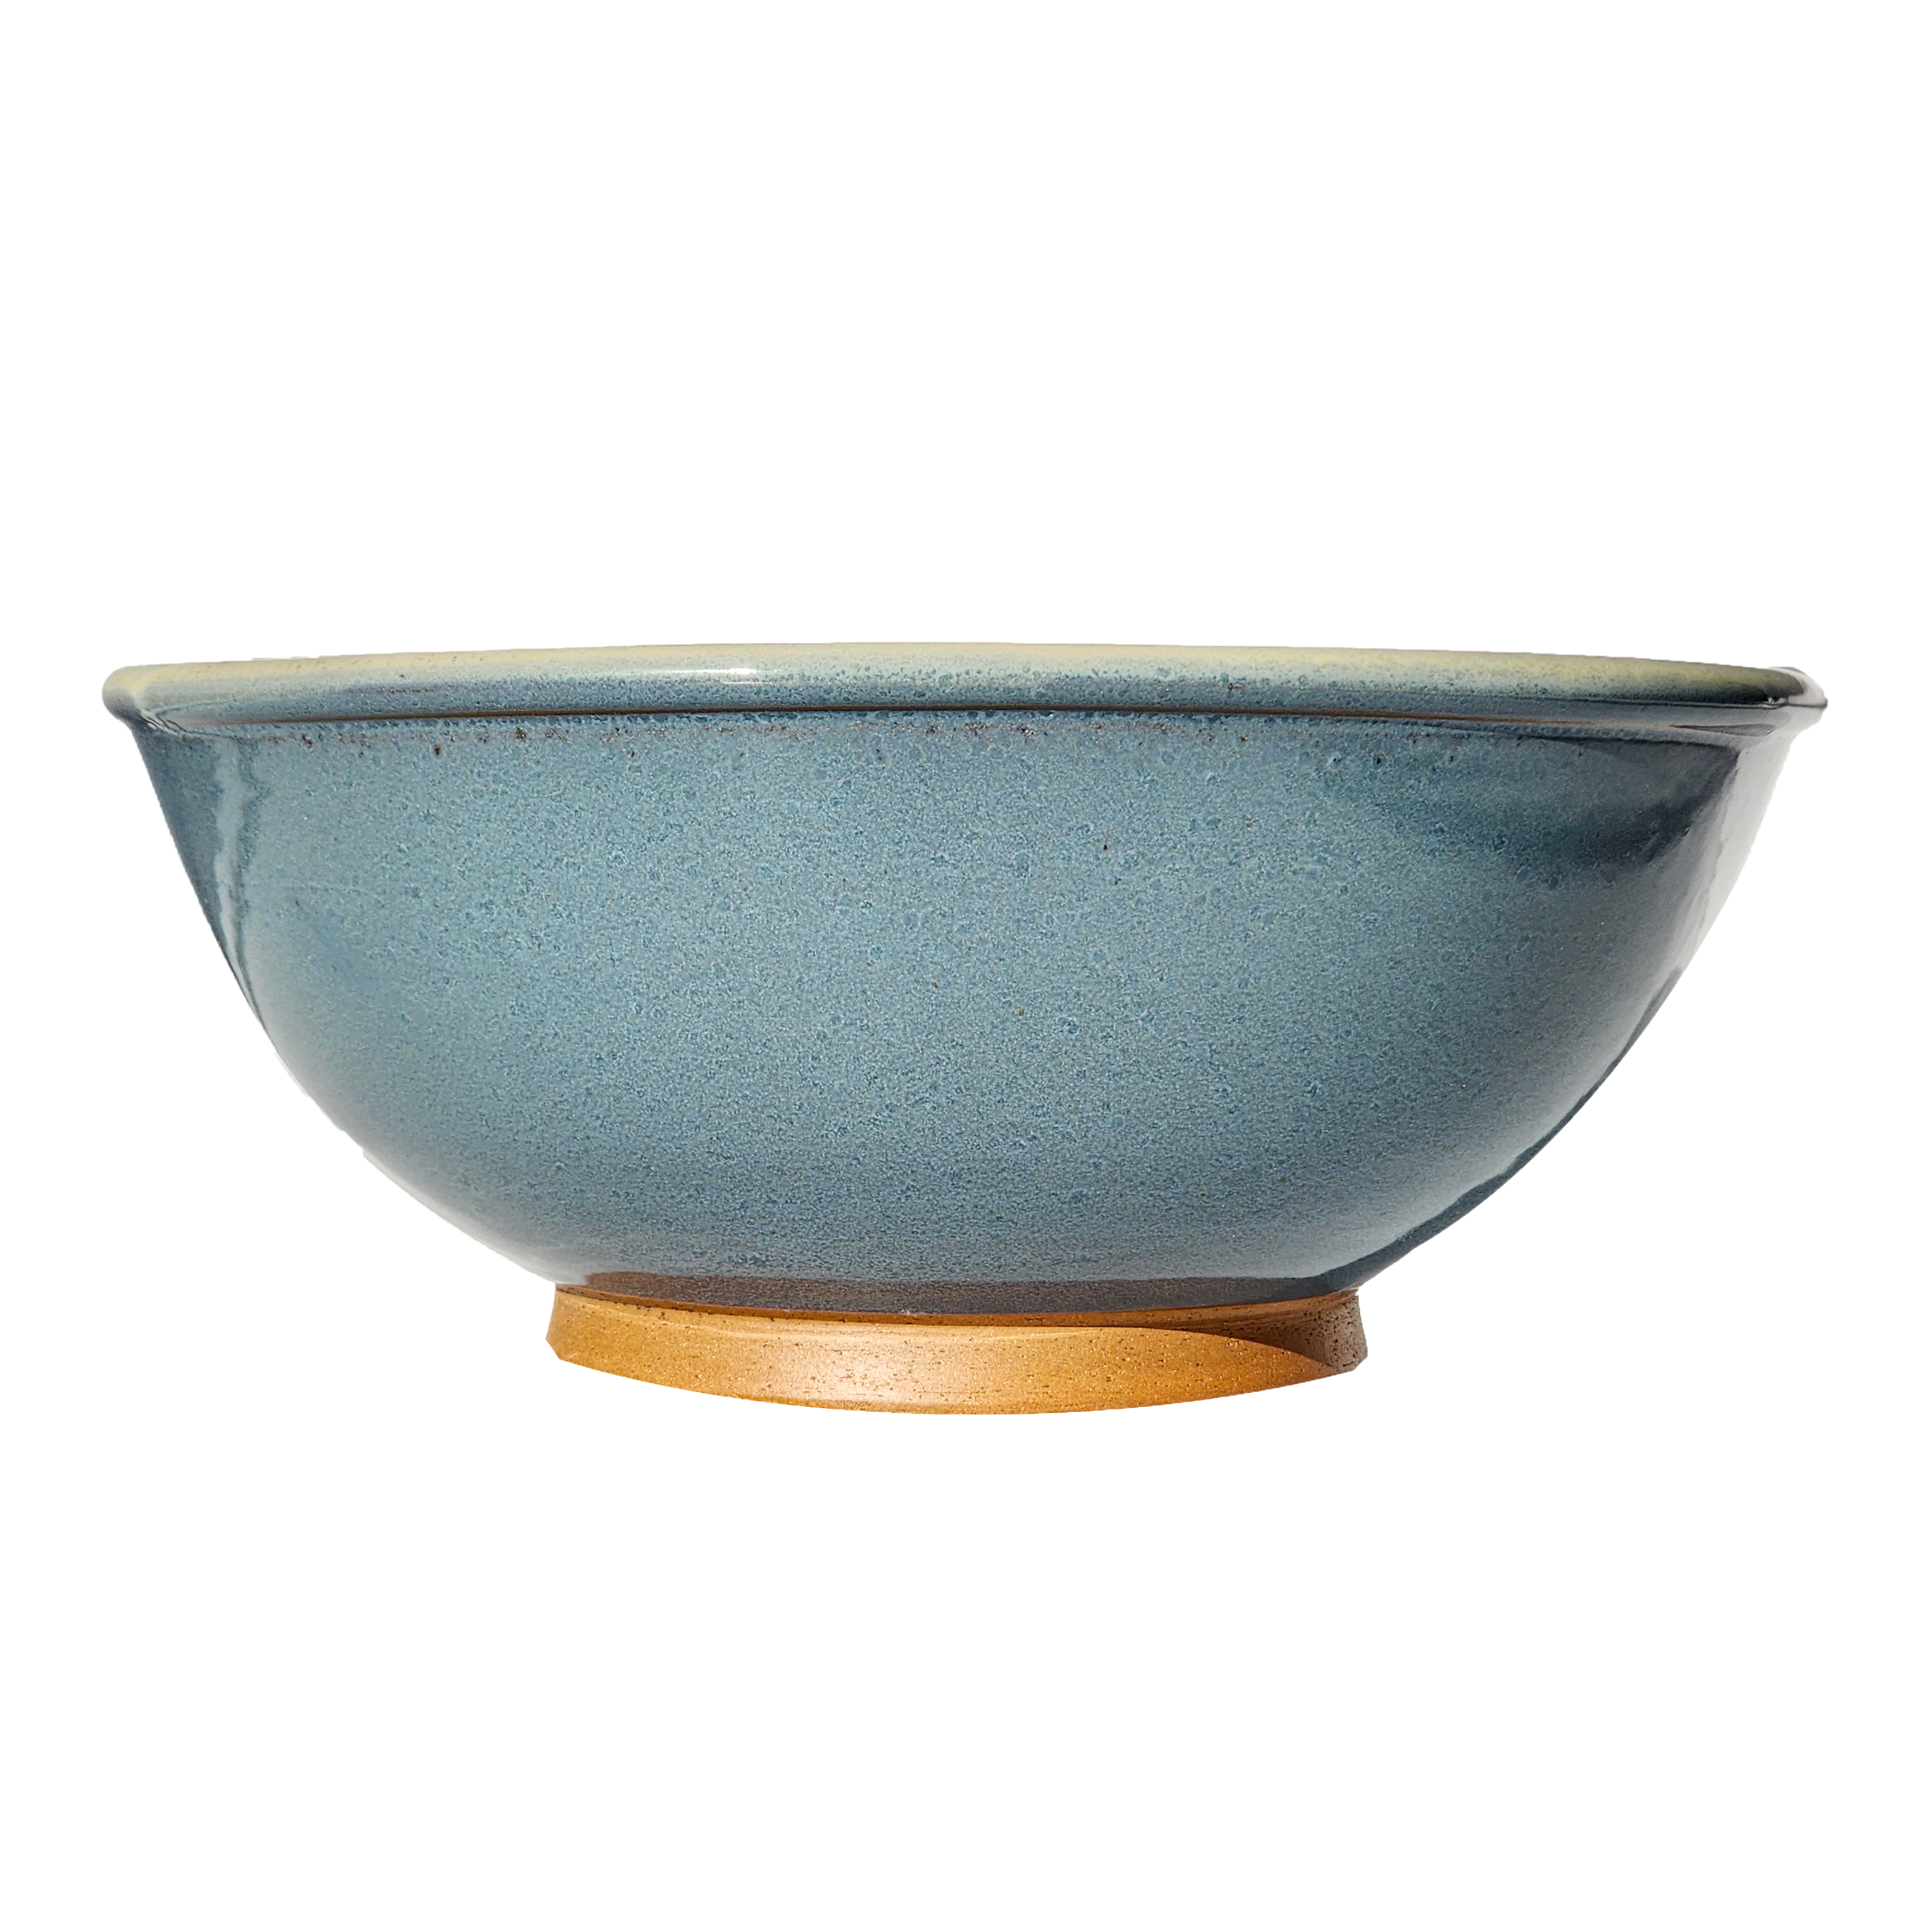 Image: A large mixing bowl in serene light blue, offering generous space with a capacity of 12.5 cups. Add a calming and refreshing vibe to your cooking routine.